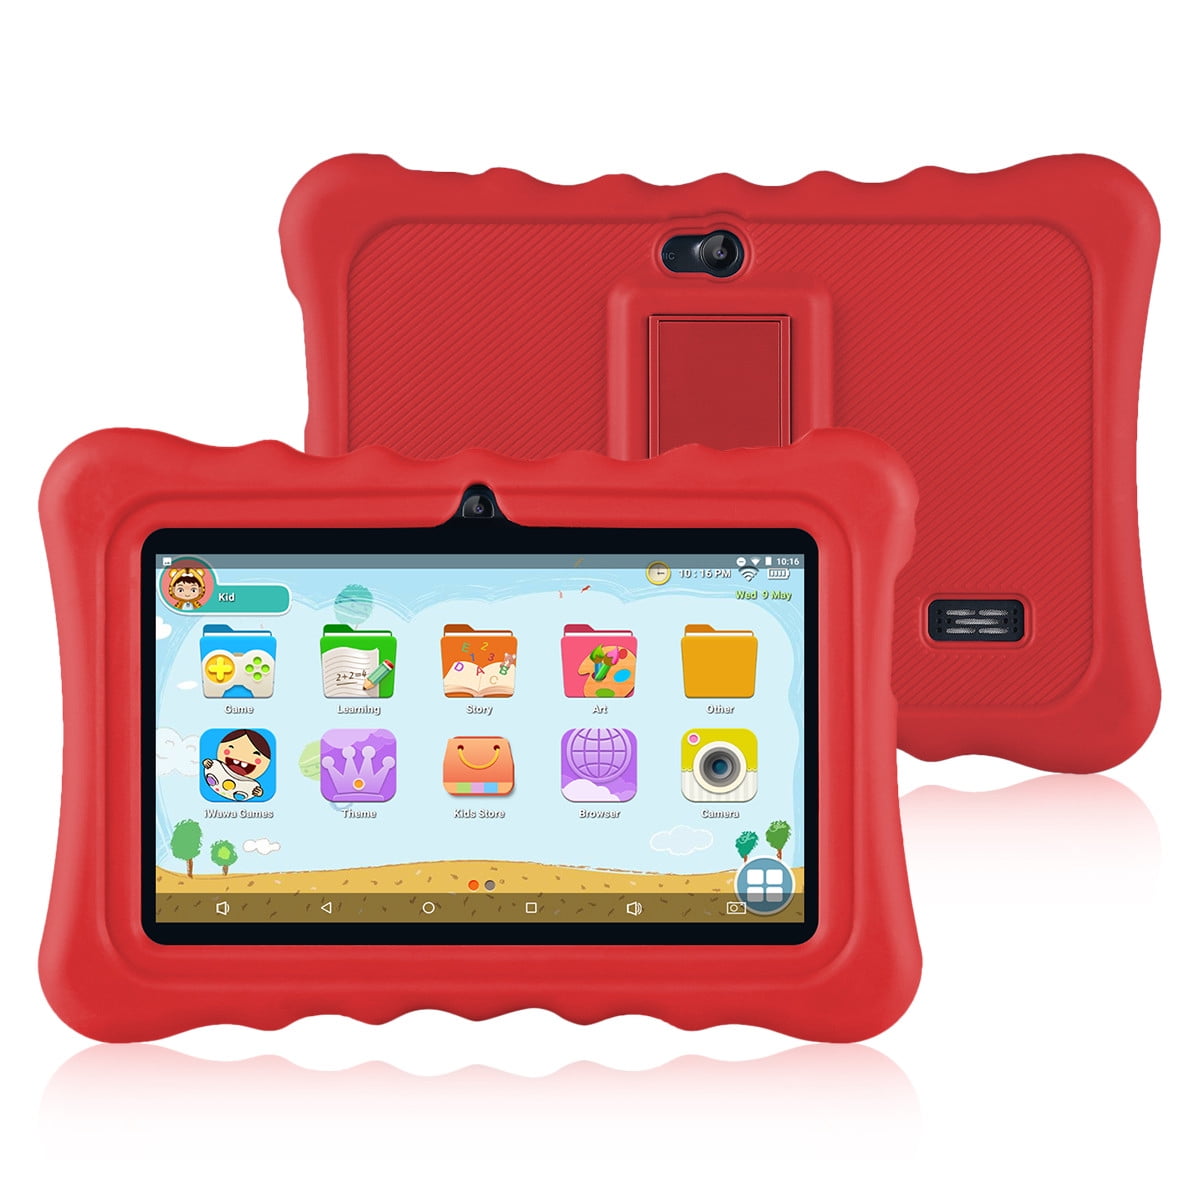 Kids Edition Tablet, Android 7.1 OS Tablet 7" Display 1G ...